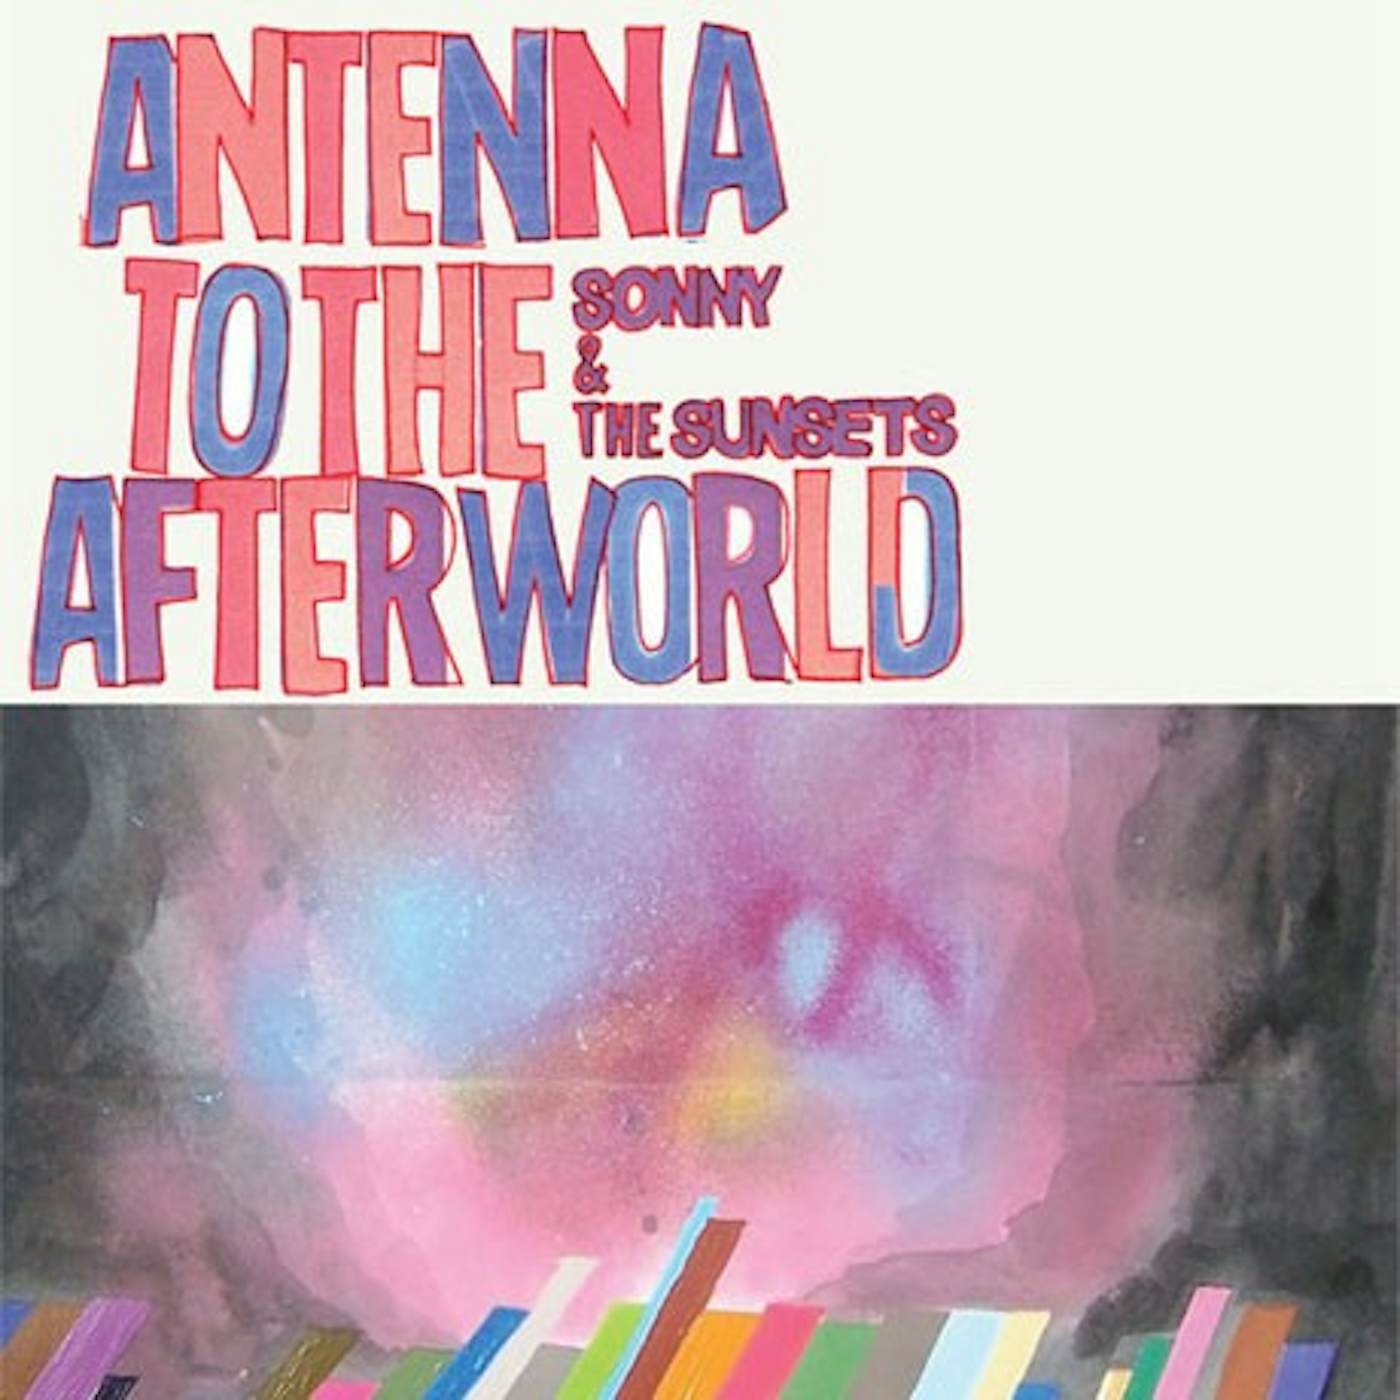 Sonny & The Sunsets Antenna to the Afterworld (Garage Sale)